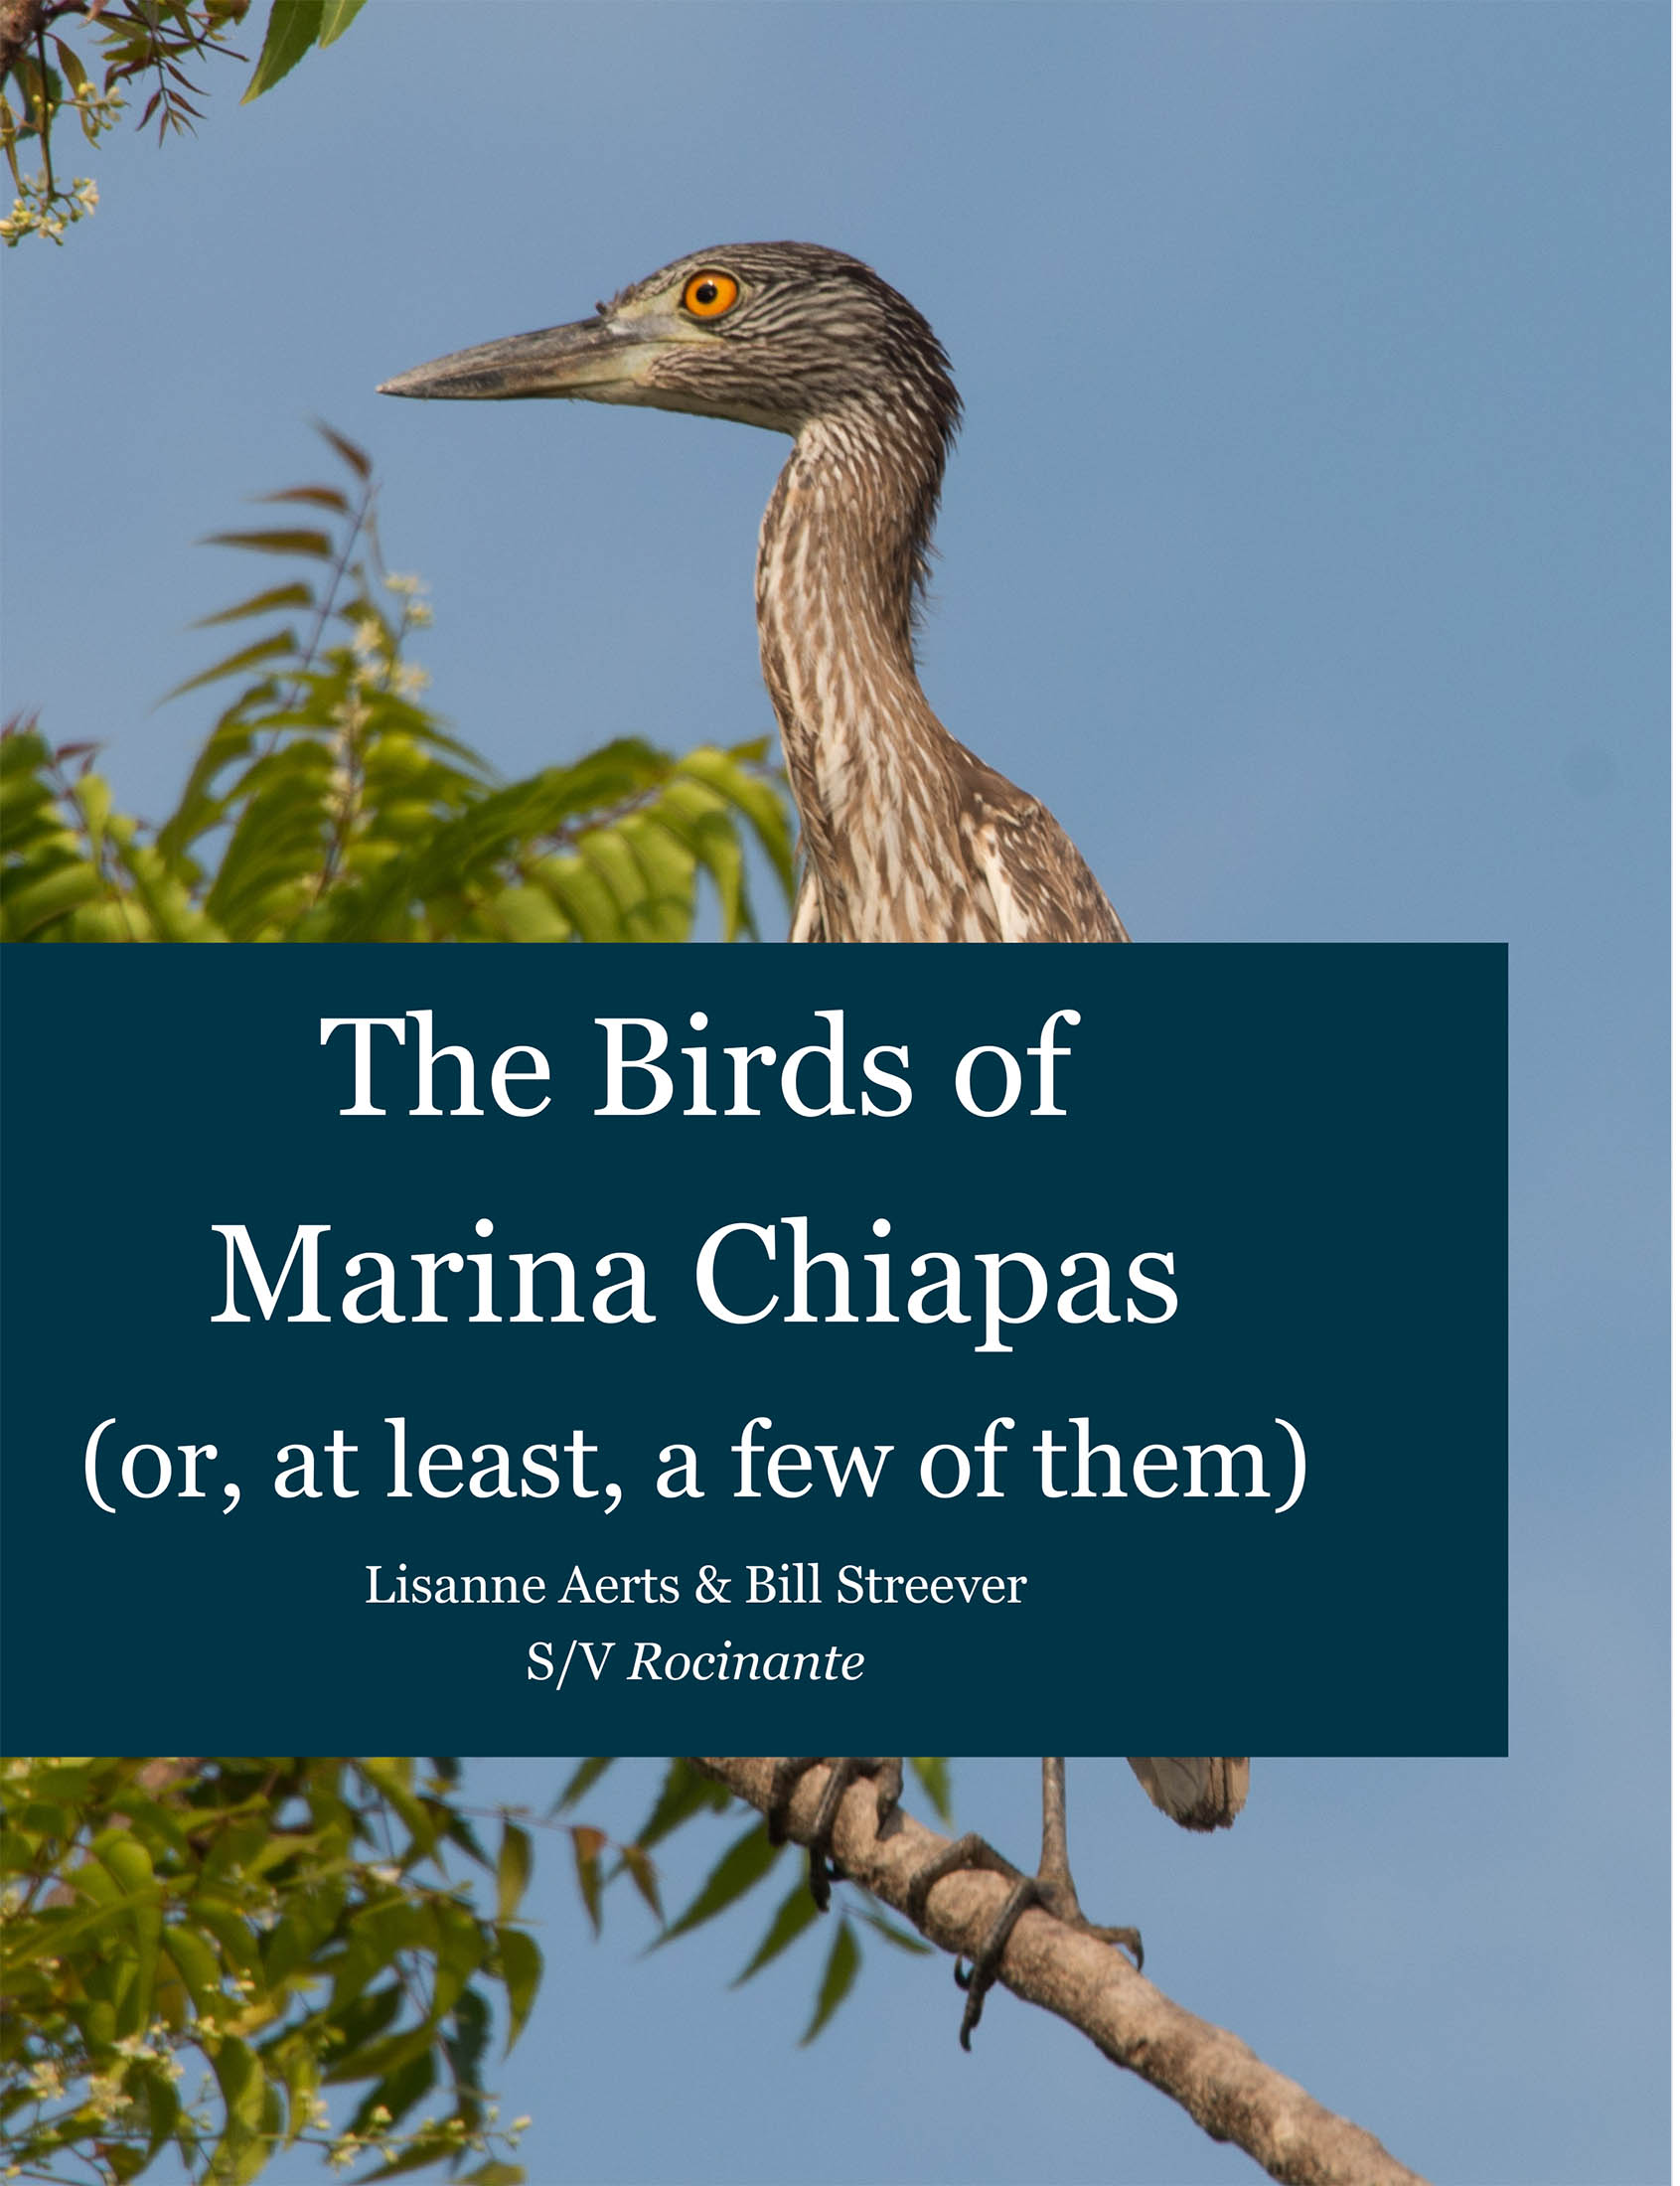 The Birds of Marina Chiapas (or, at least, a few of them) Lisanne Aerts & Bill Streever S/V Rocinante